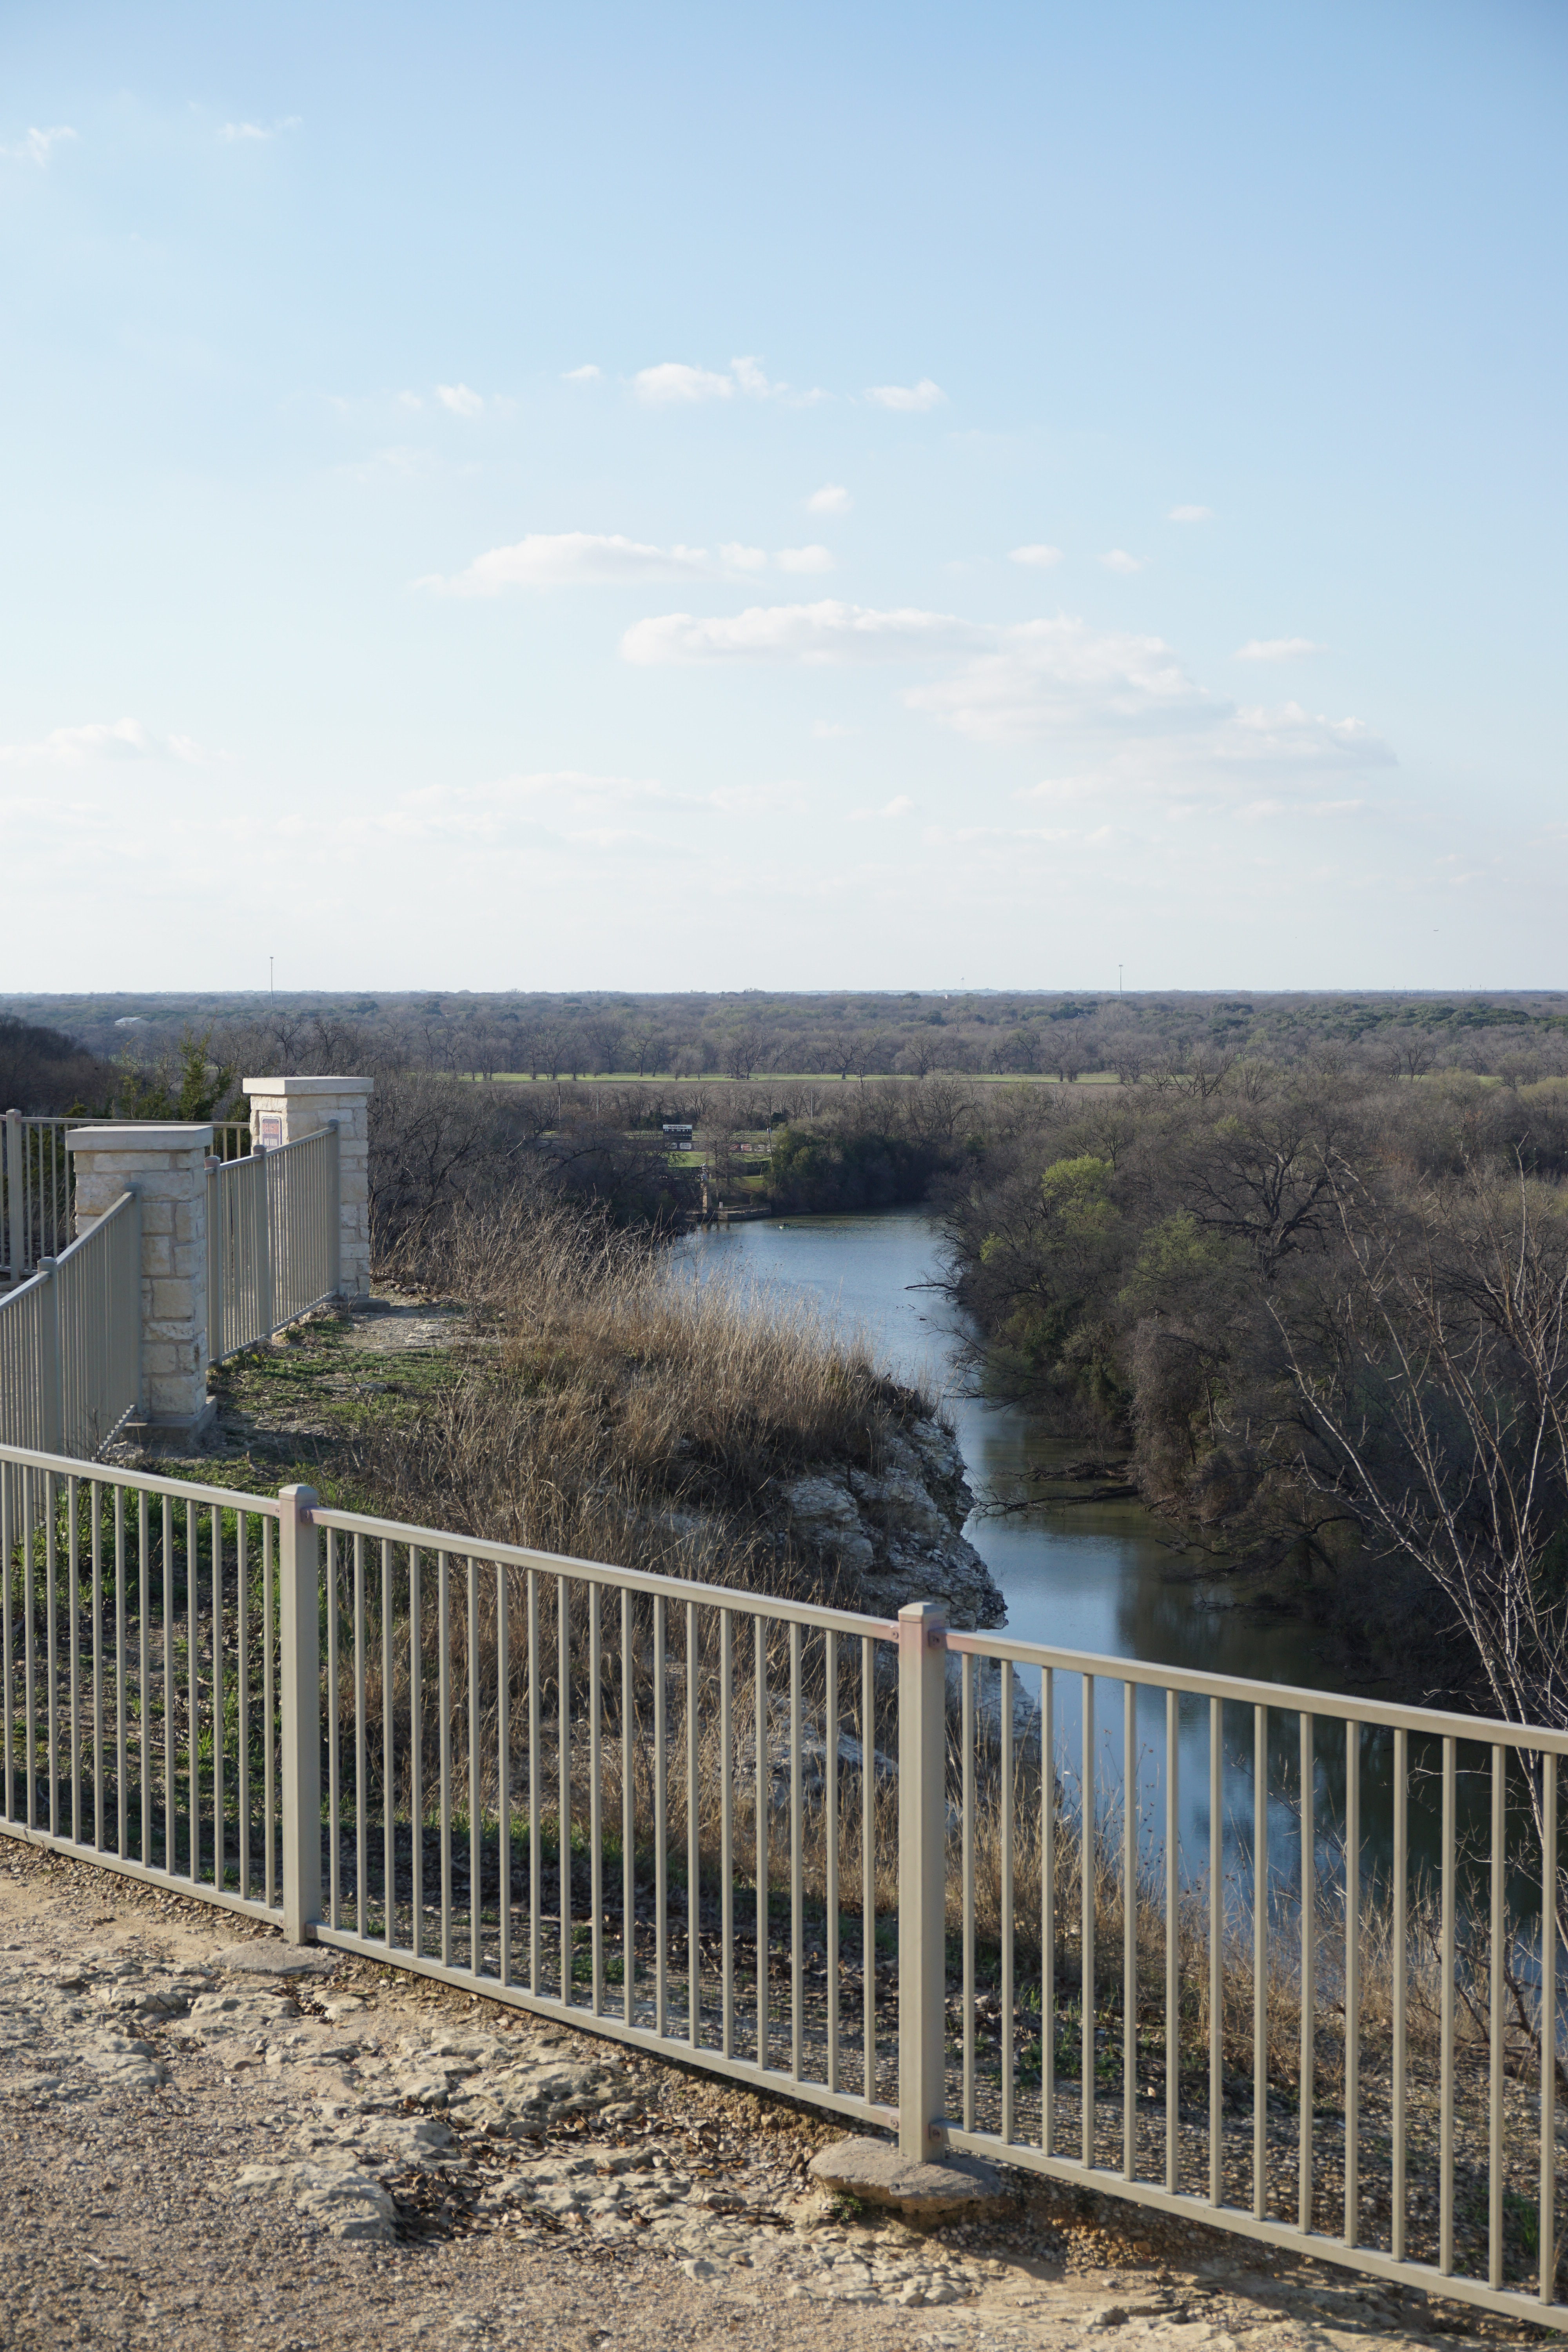 Lover's Leap outlook at Cameron Park in Waco, TX - Addie, Old World New